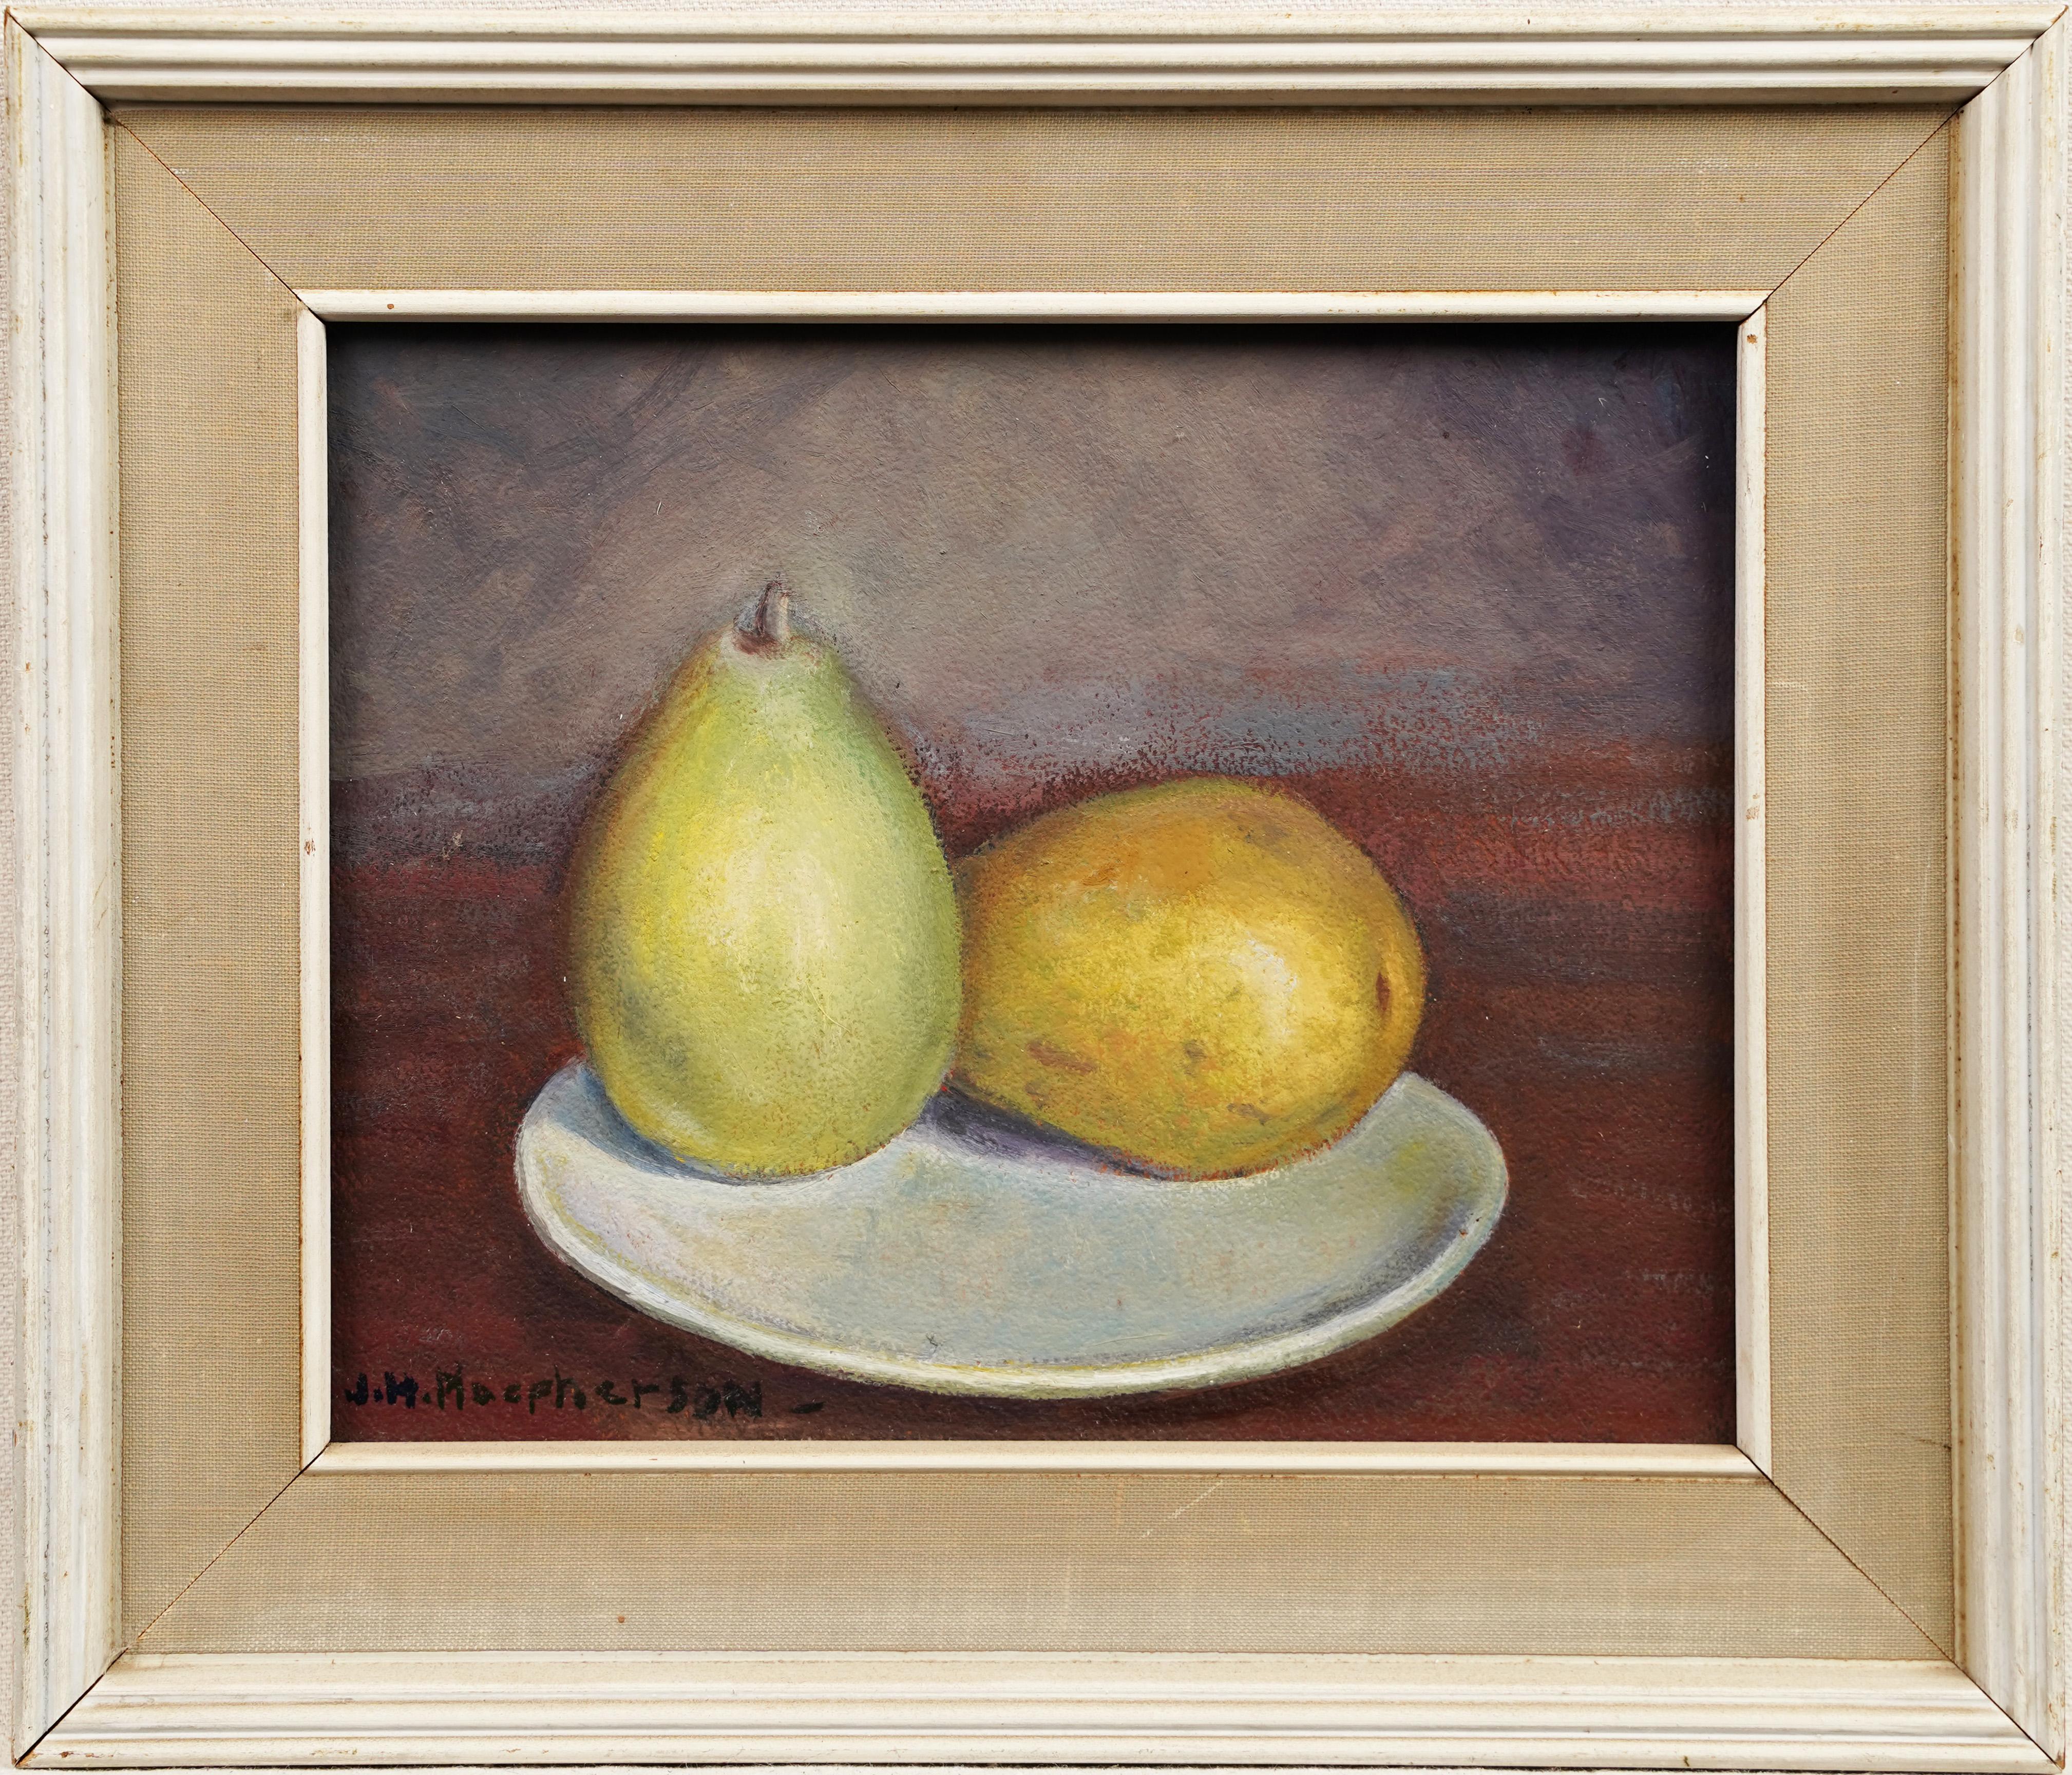  Antique American Signed Framed Impressionist Still Life Fruit Pear Oil Painting 1